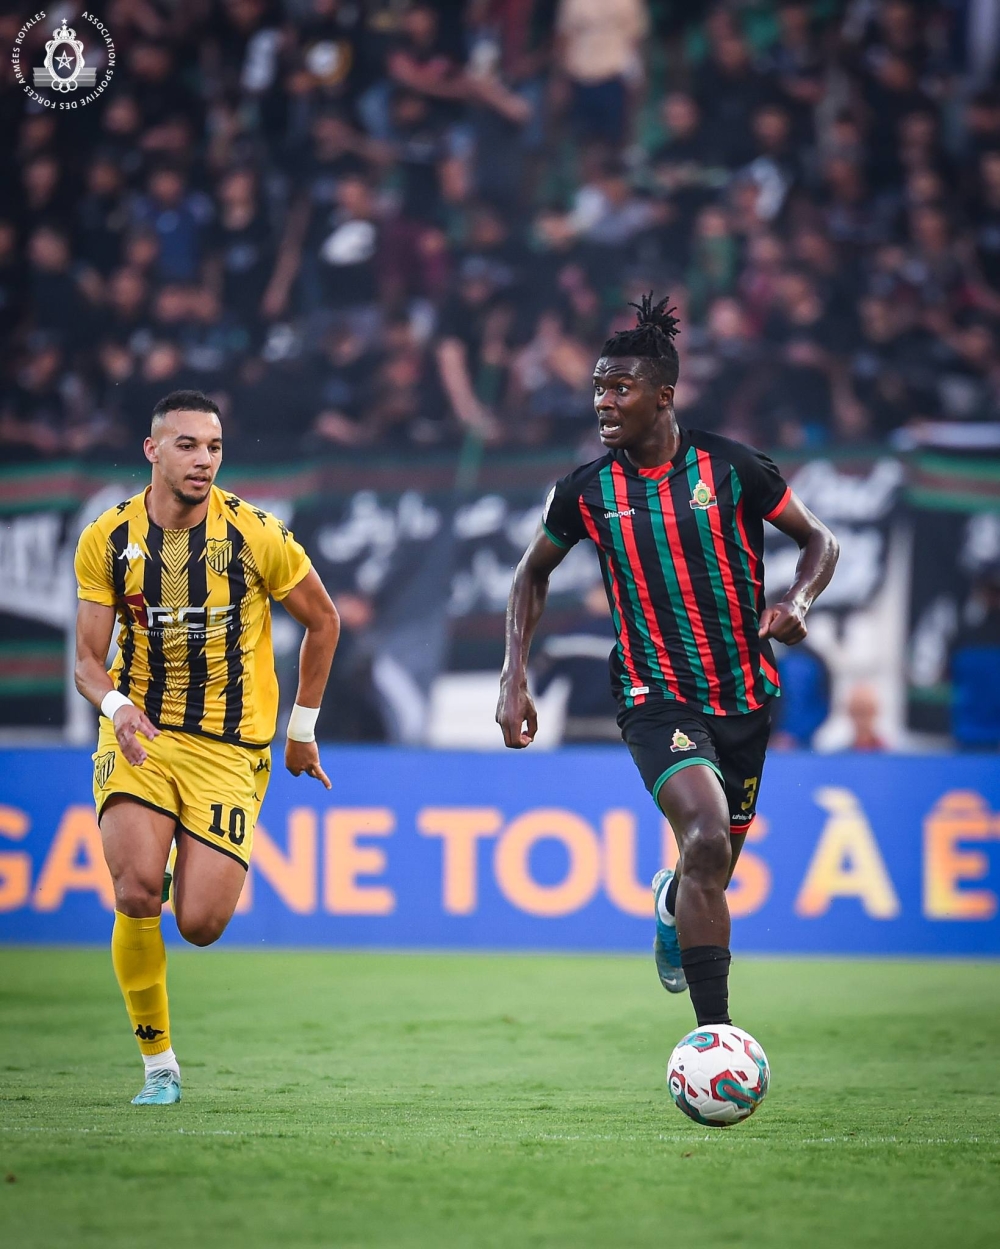 Defender Emmanuel Imanishimwe was among foreign-based Rwandan standout performers over the weekend, after helping his side AS FAR to qualify for Moroccan Cup final-courtesy